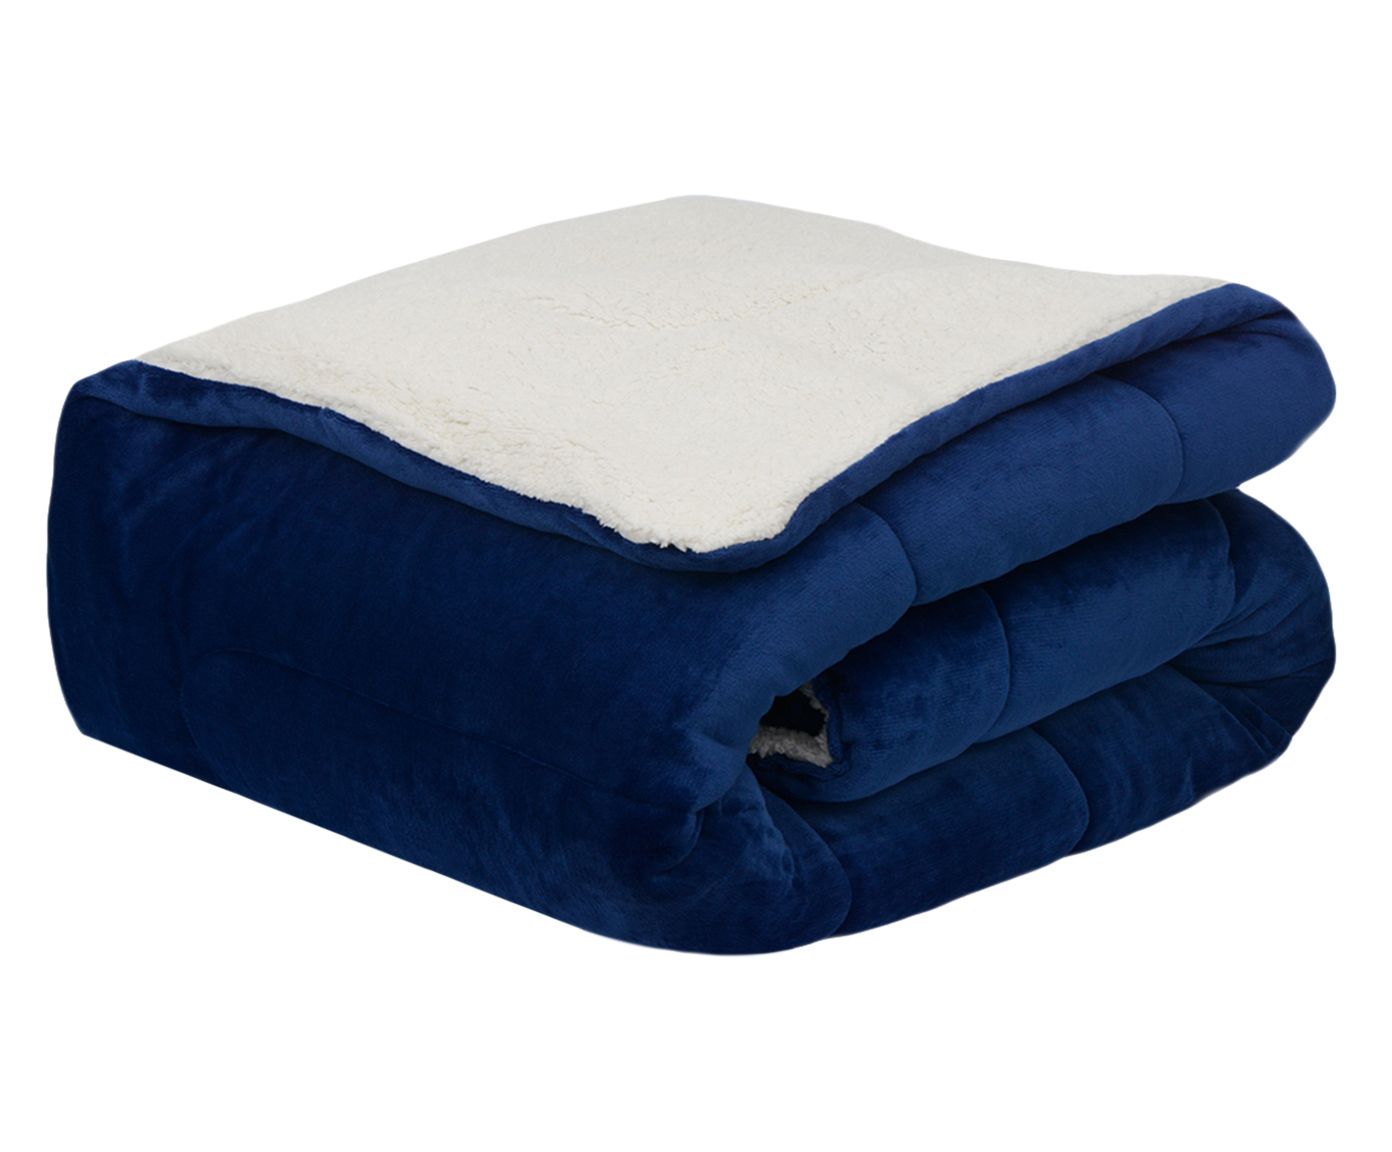 Coberdrom Flannel Sherpa Azul Marinho - Queen Size | Westwing.com.br